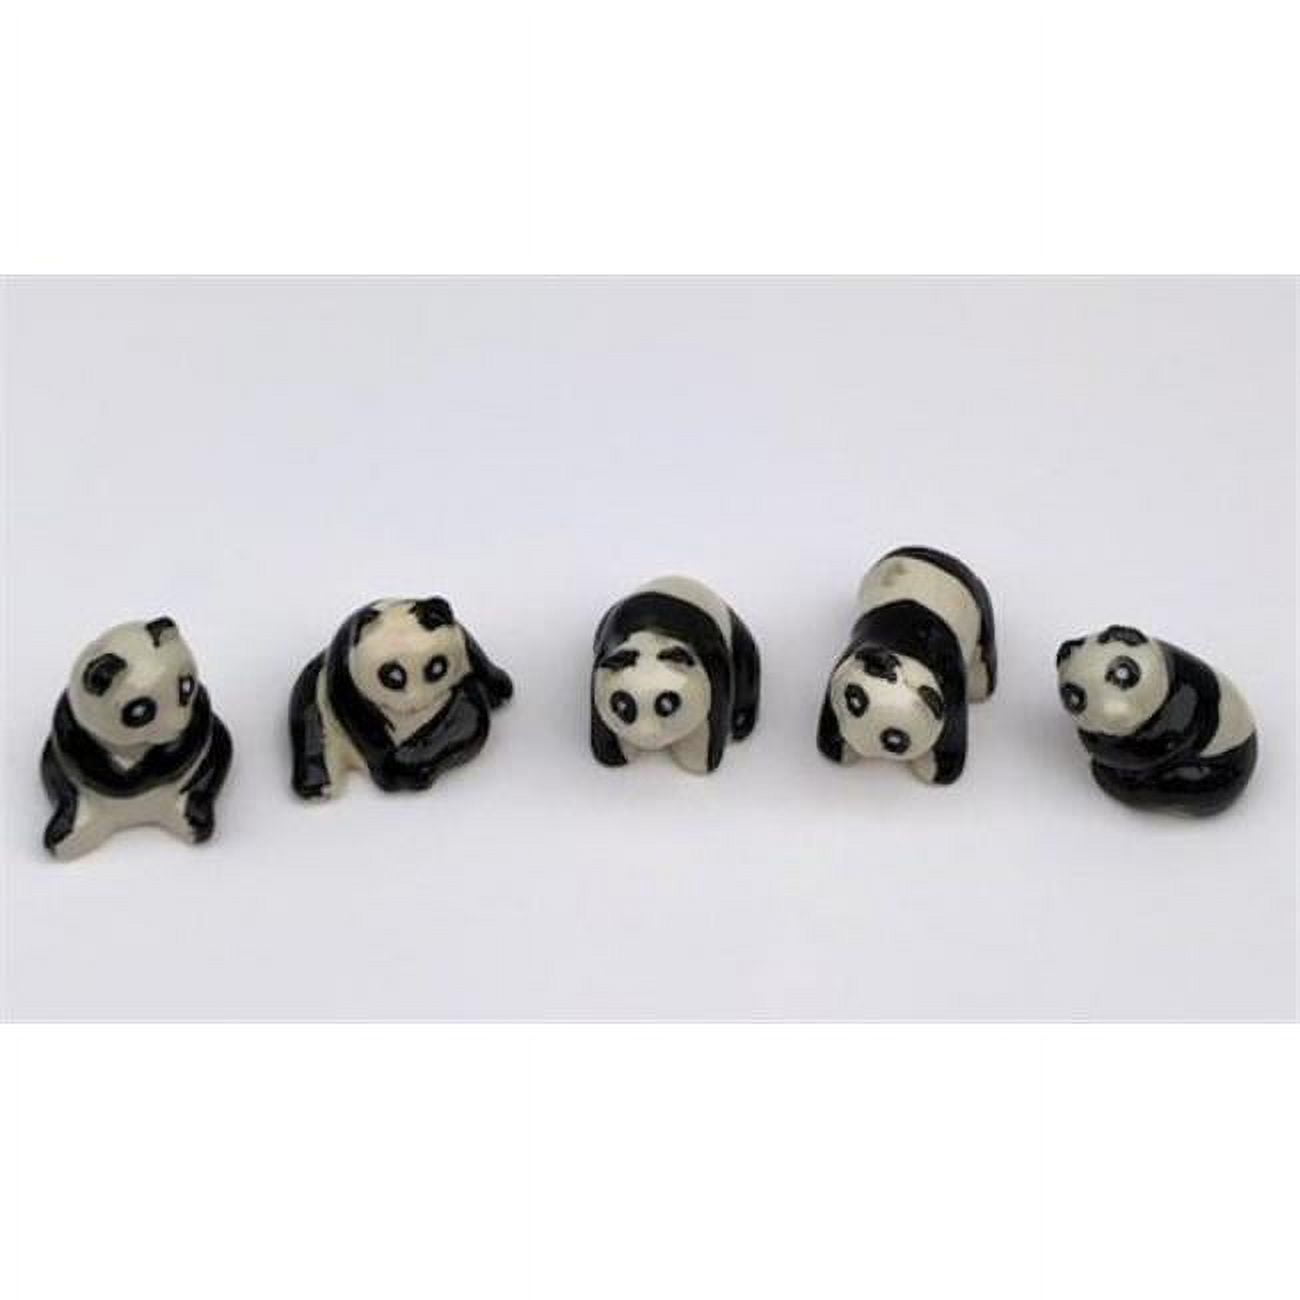 Picture of Bonsai Boy of New York e3009 1.5 in. Various Poses Ceramic Panda Figurines, Set of 5